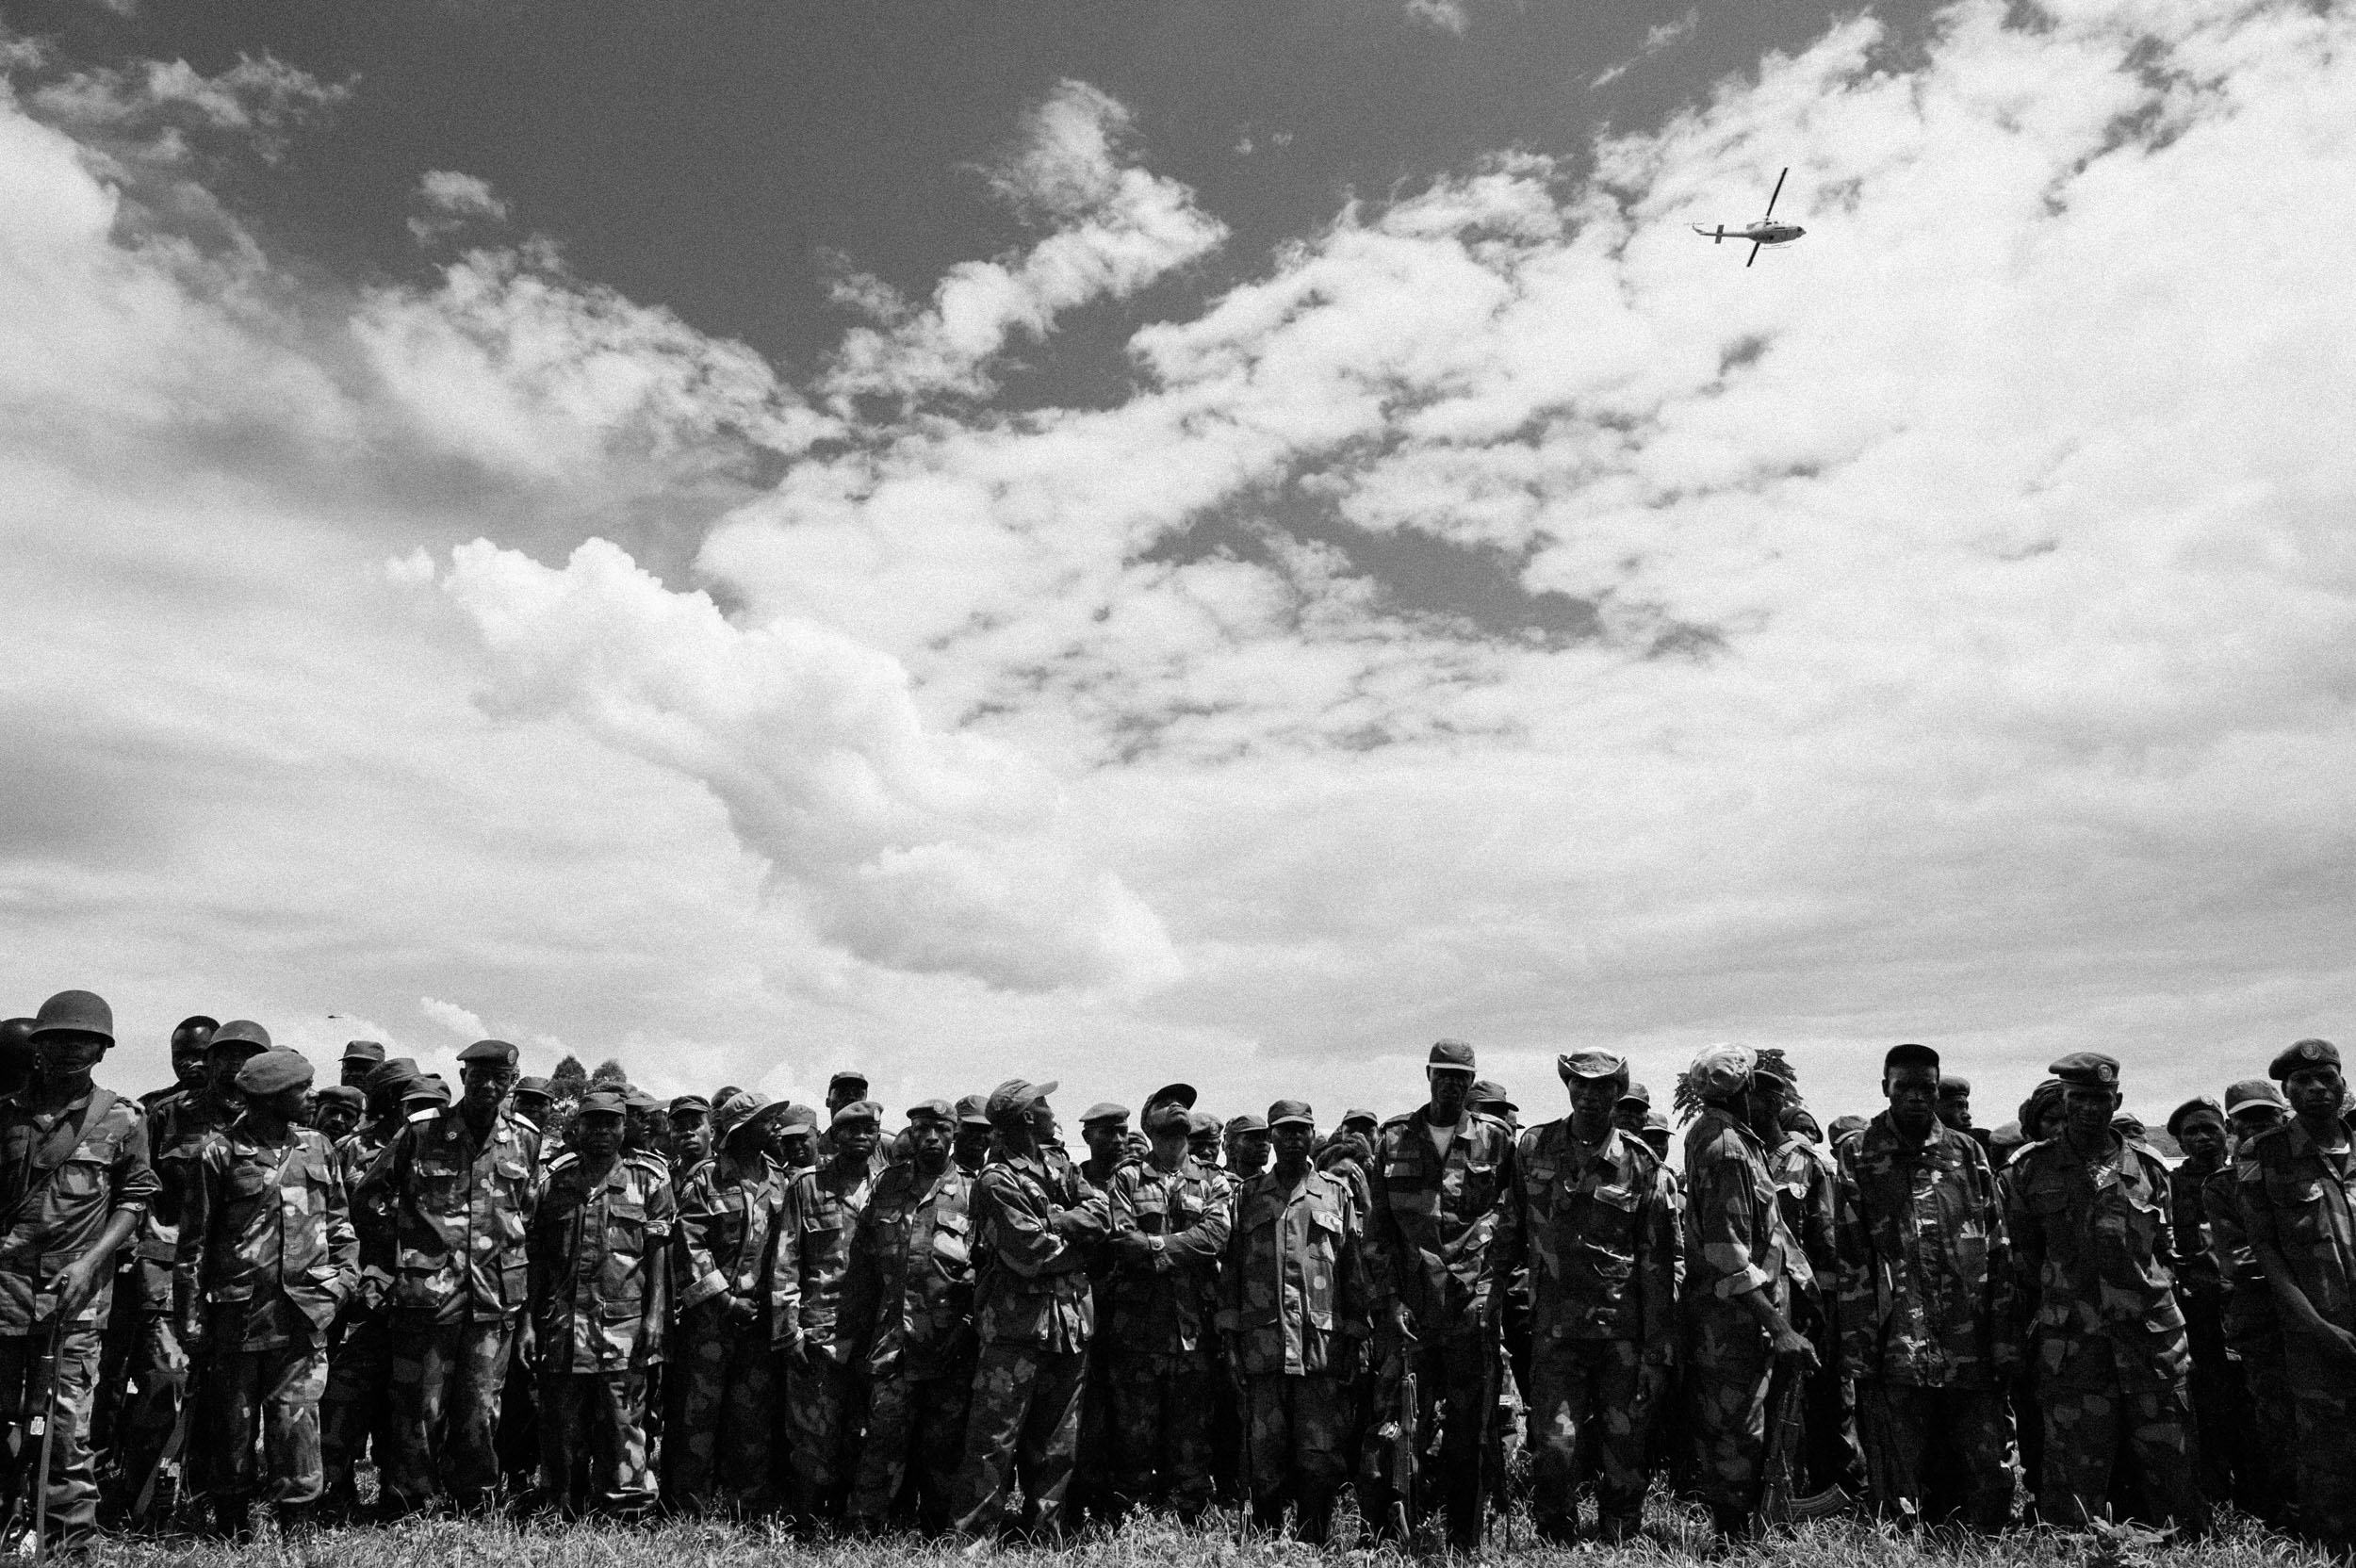  A UN helicopter passes over a group of recently retreated troops from the Armed Forces of the Democratic Republic of the Congo during the 2012 M23 Rebellion. 